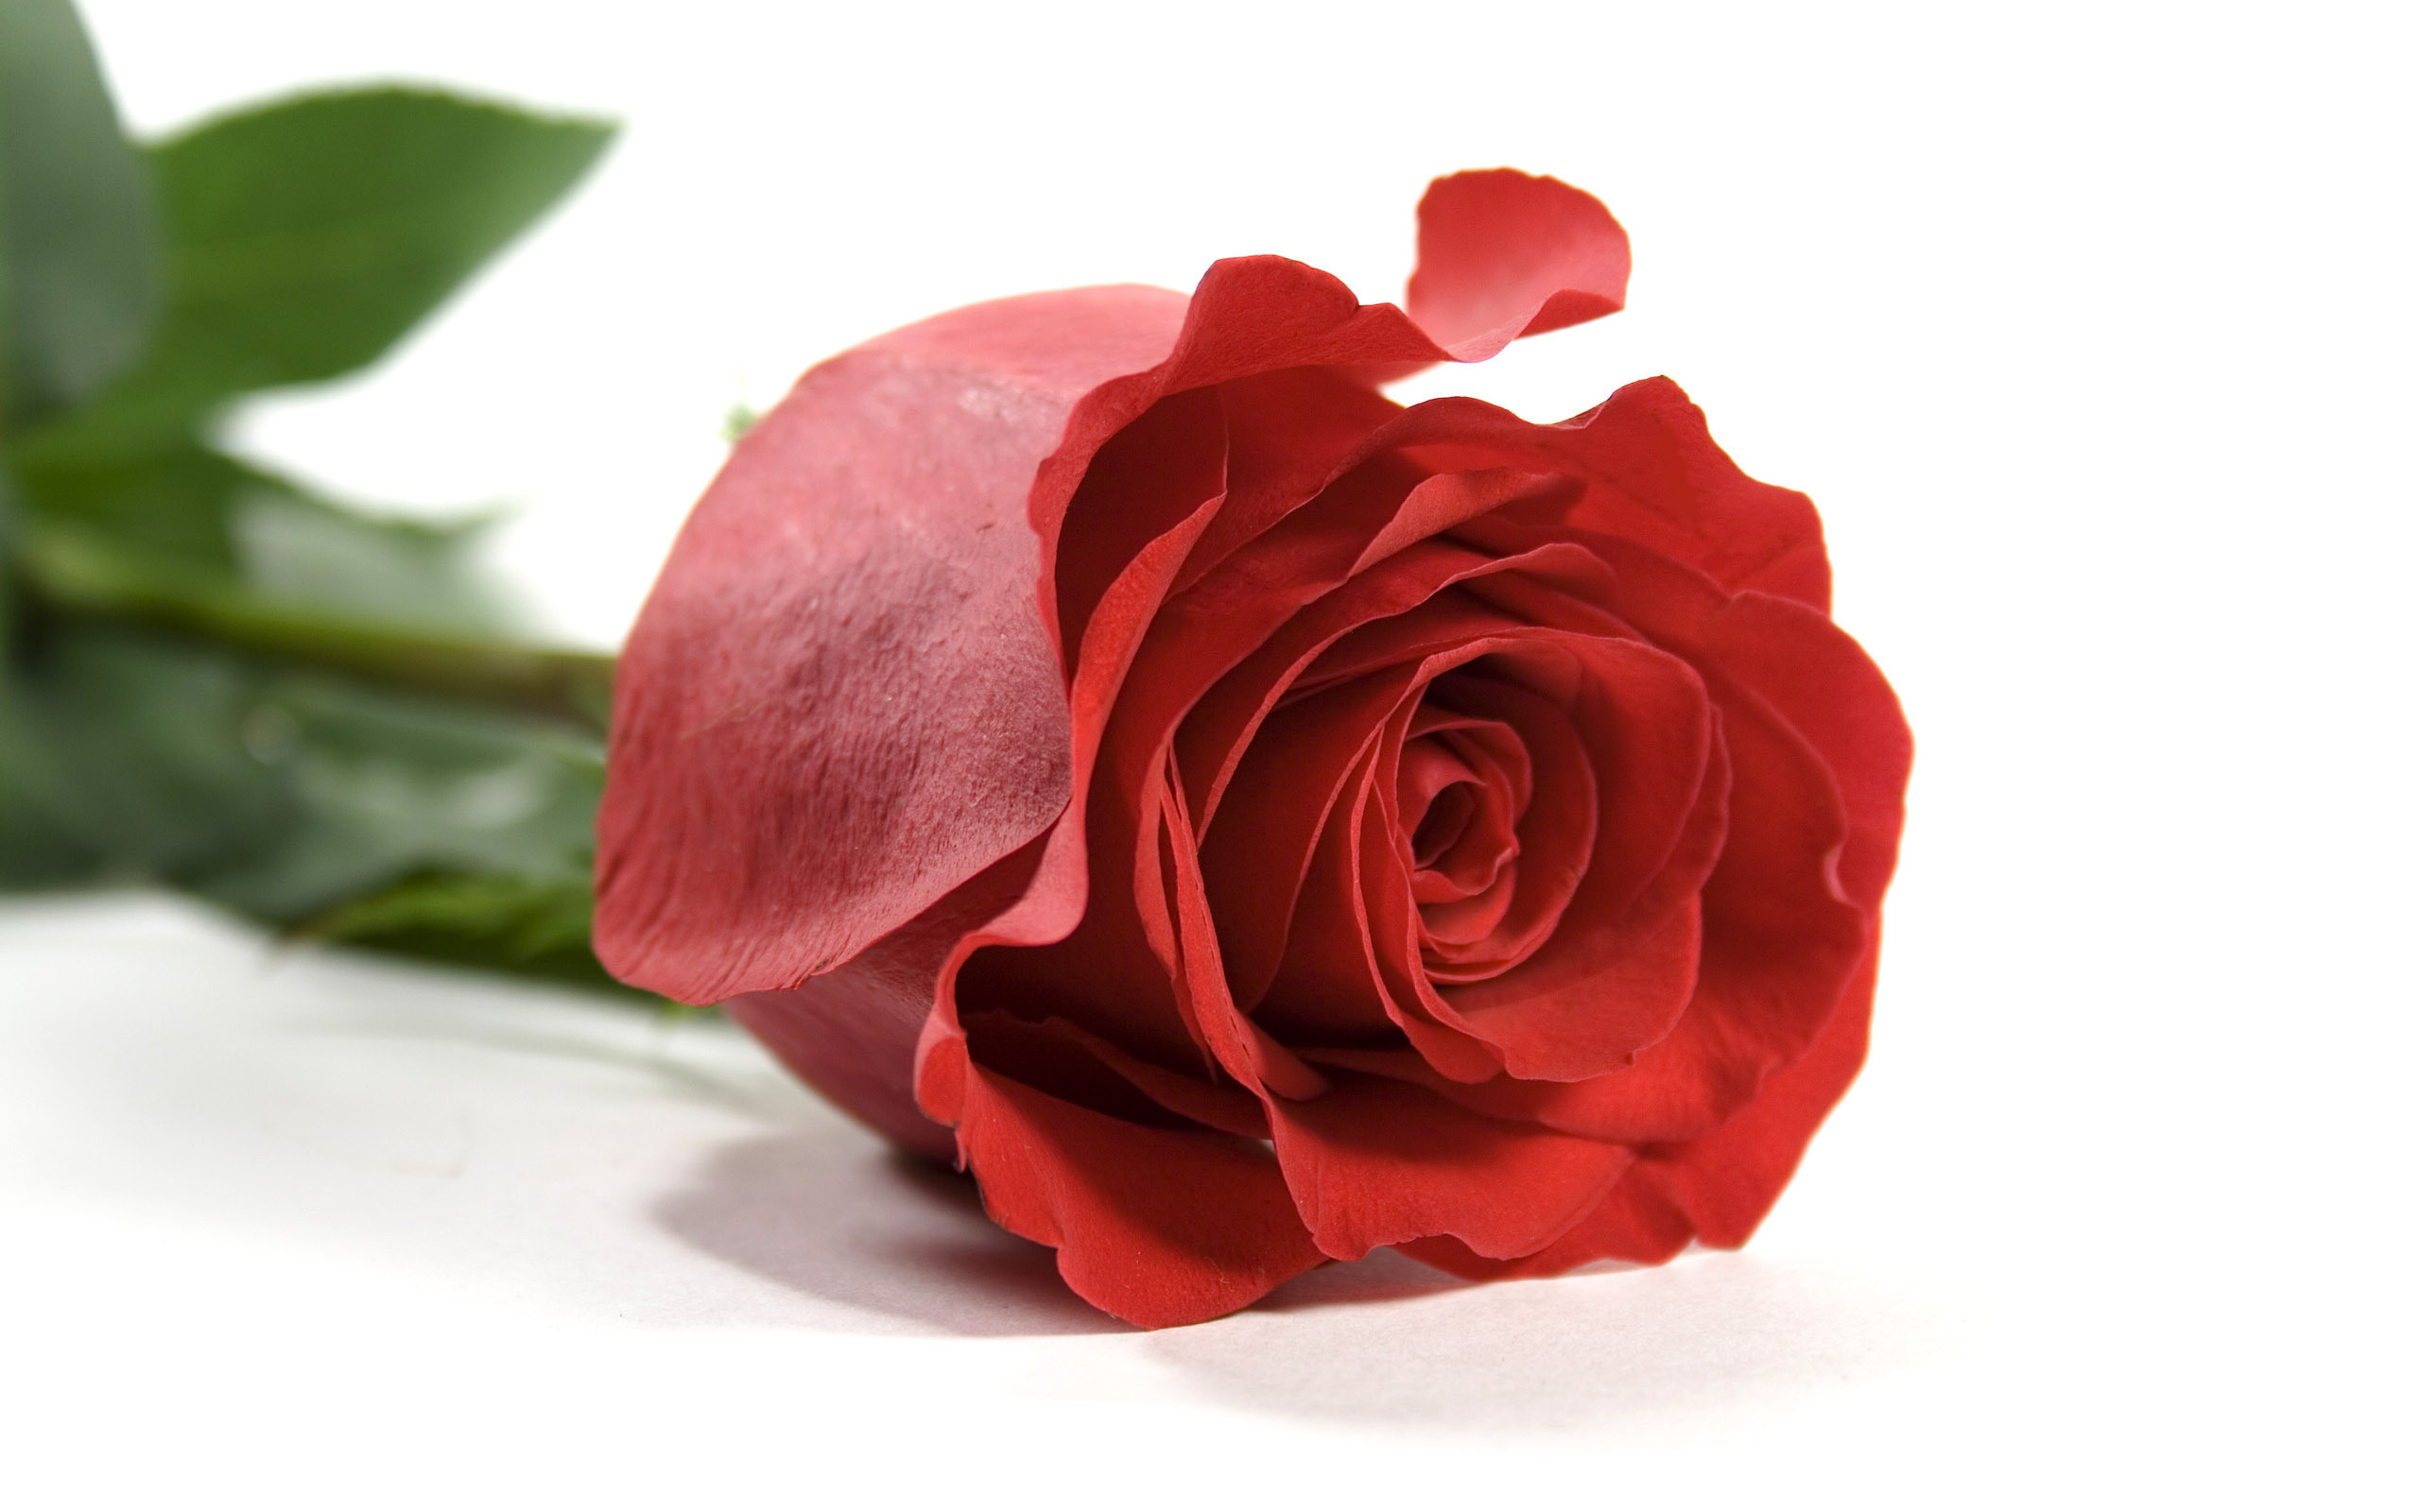 2560x1600 Red rose on white background